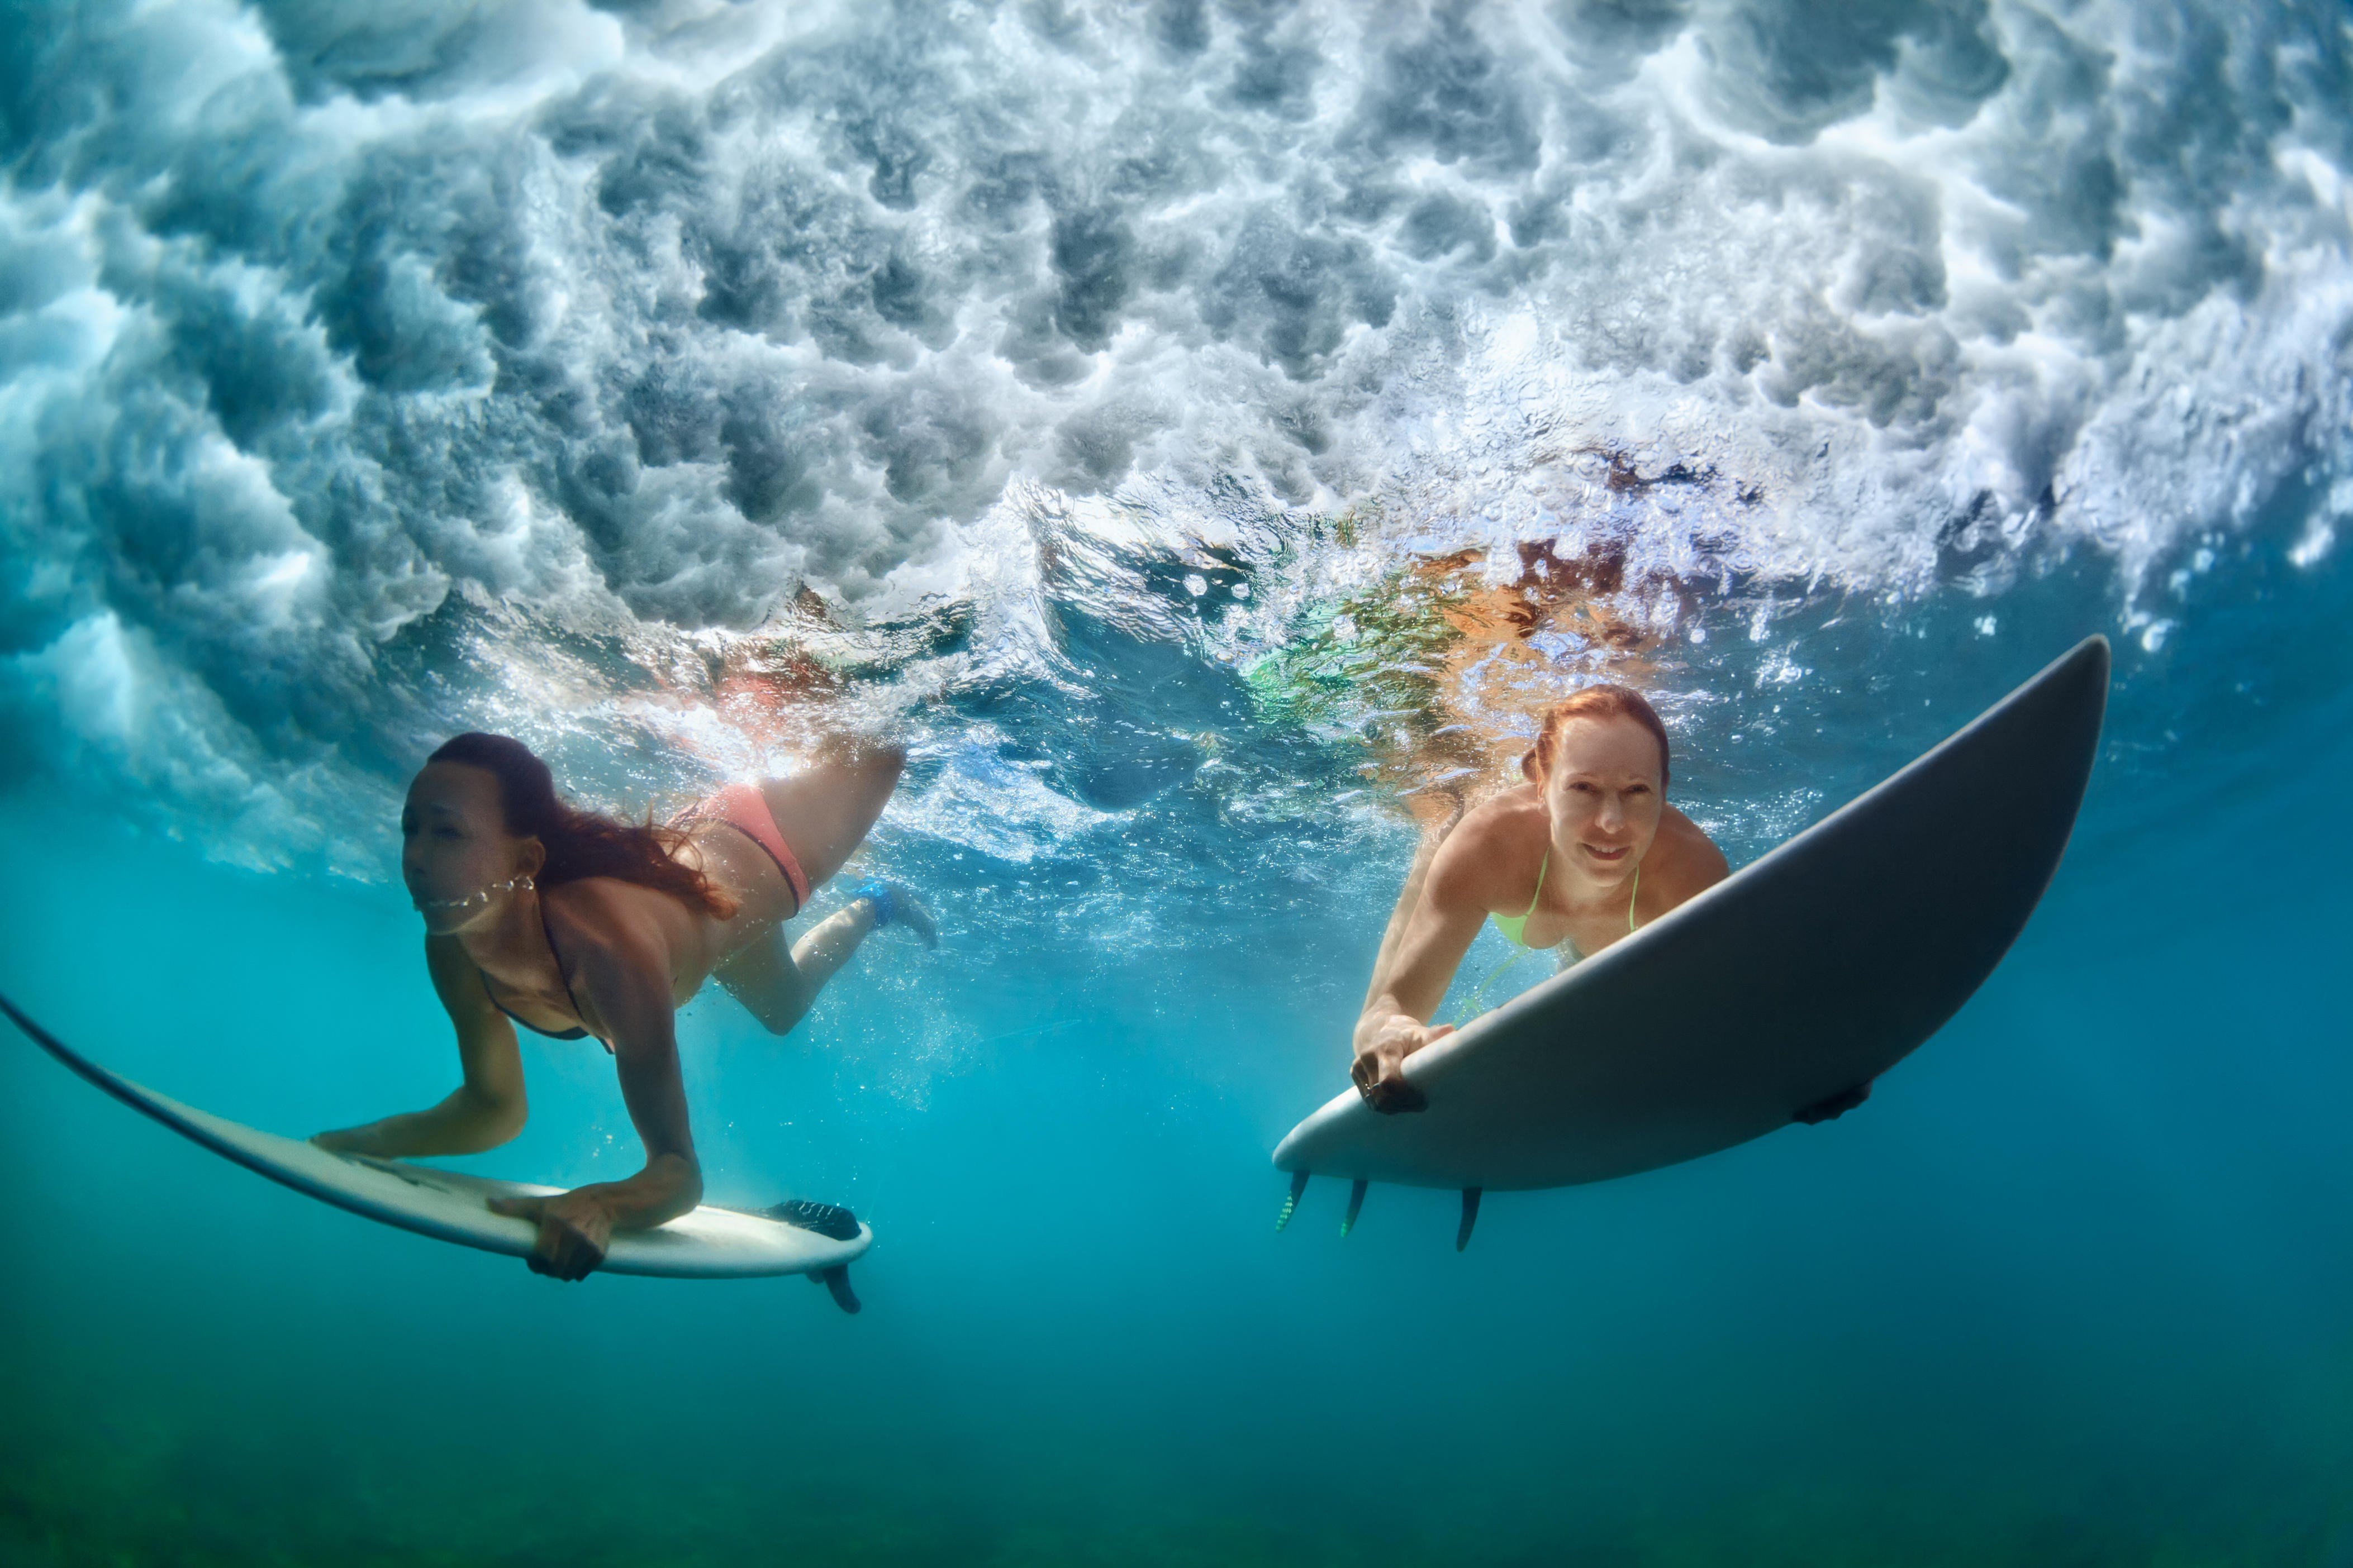 Learning to surf can be daunting, but it is not as hard as it looks with the right help. We have a list of surf schools to get you standing on your board in no time. Photo: Alamy